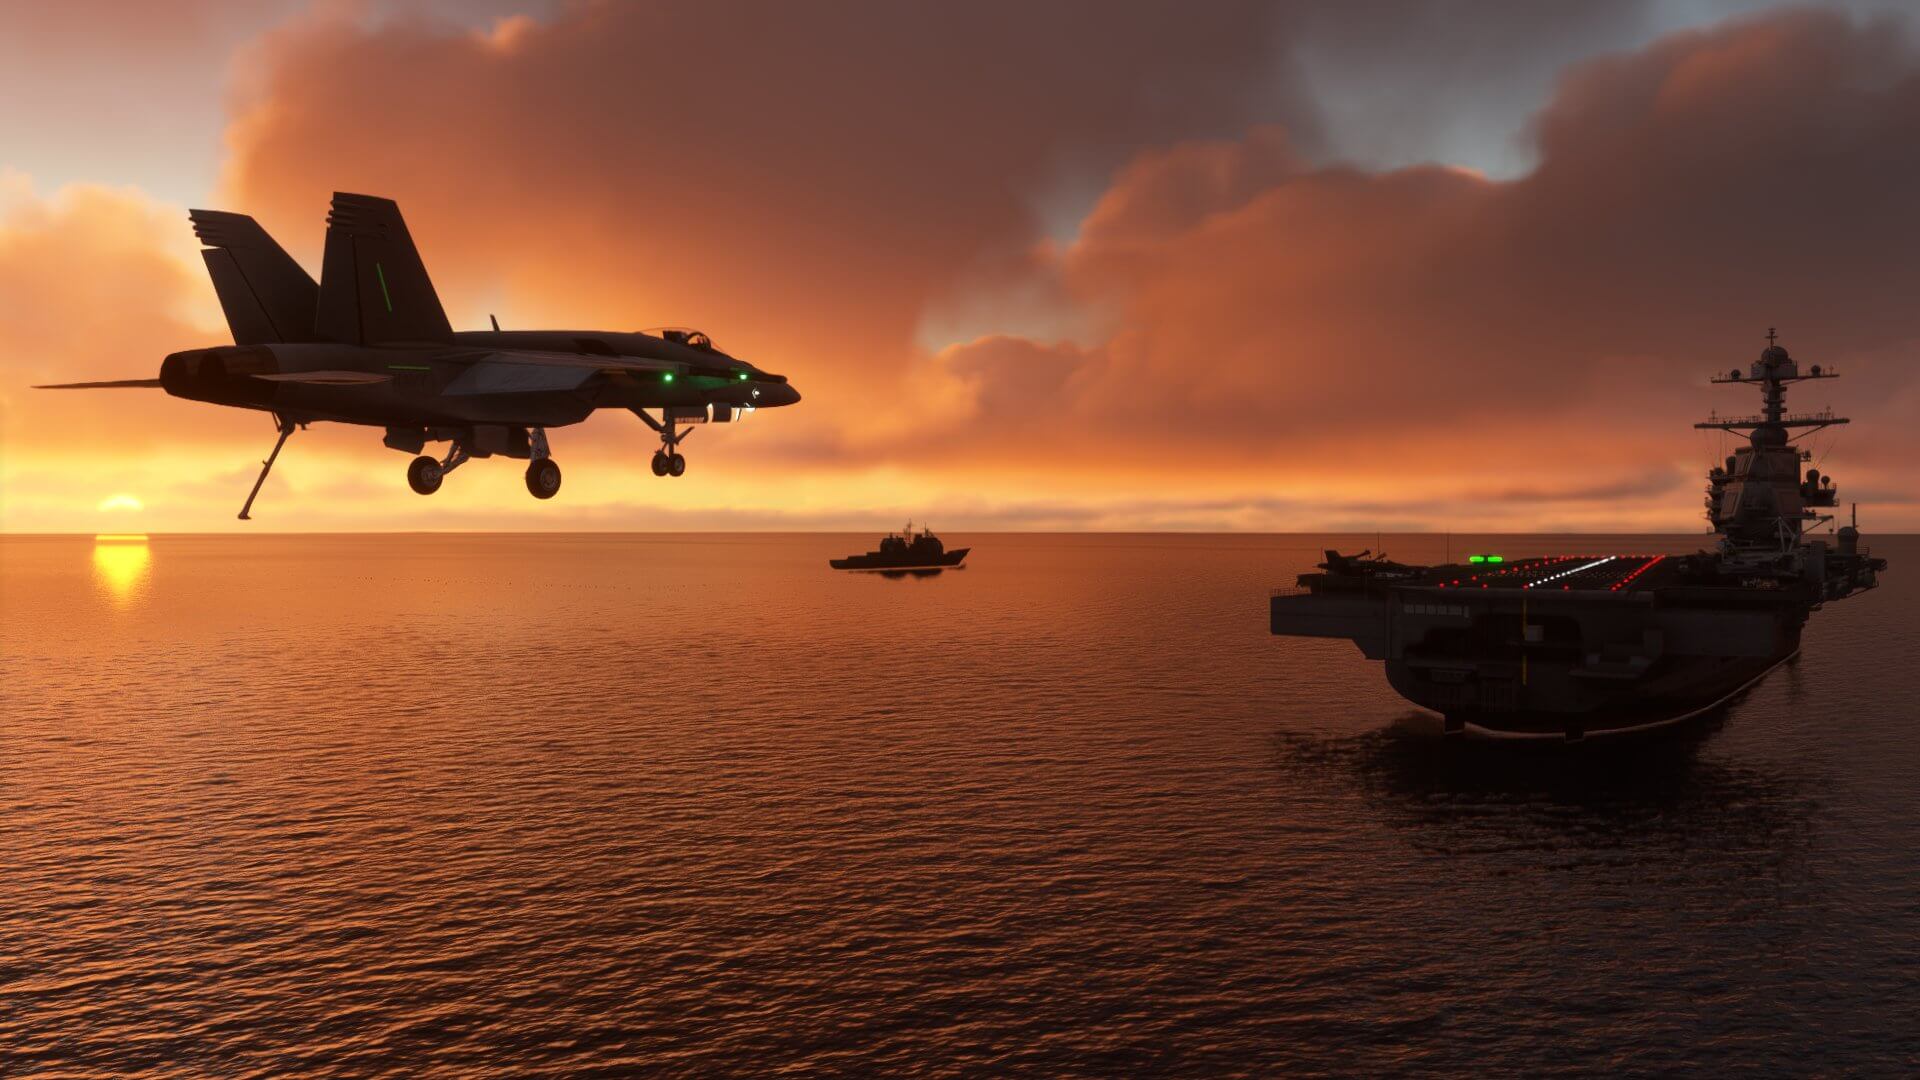 An F/A-18C with Landing Gear and Hook lowered approaches an aircraft carrier, with the sun setting in the distance.